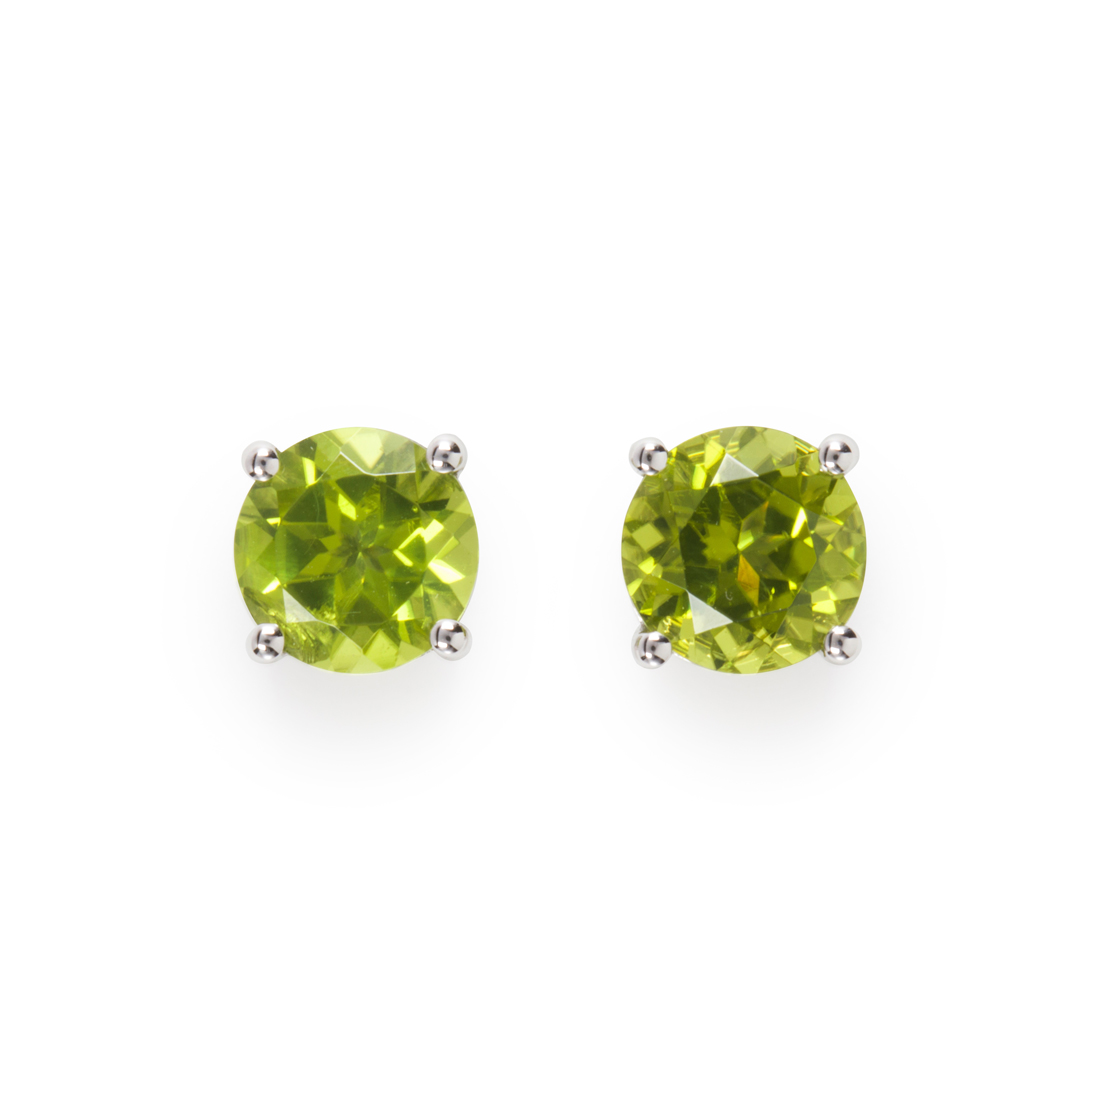 A PAIR OF PERIDOT AND FOURTEEN